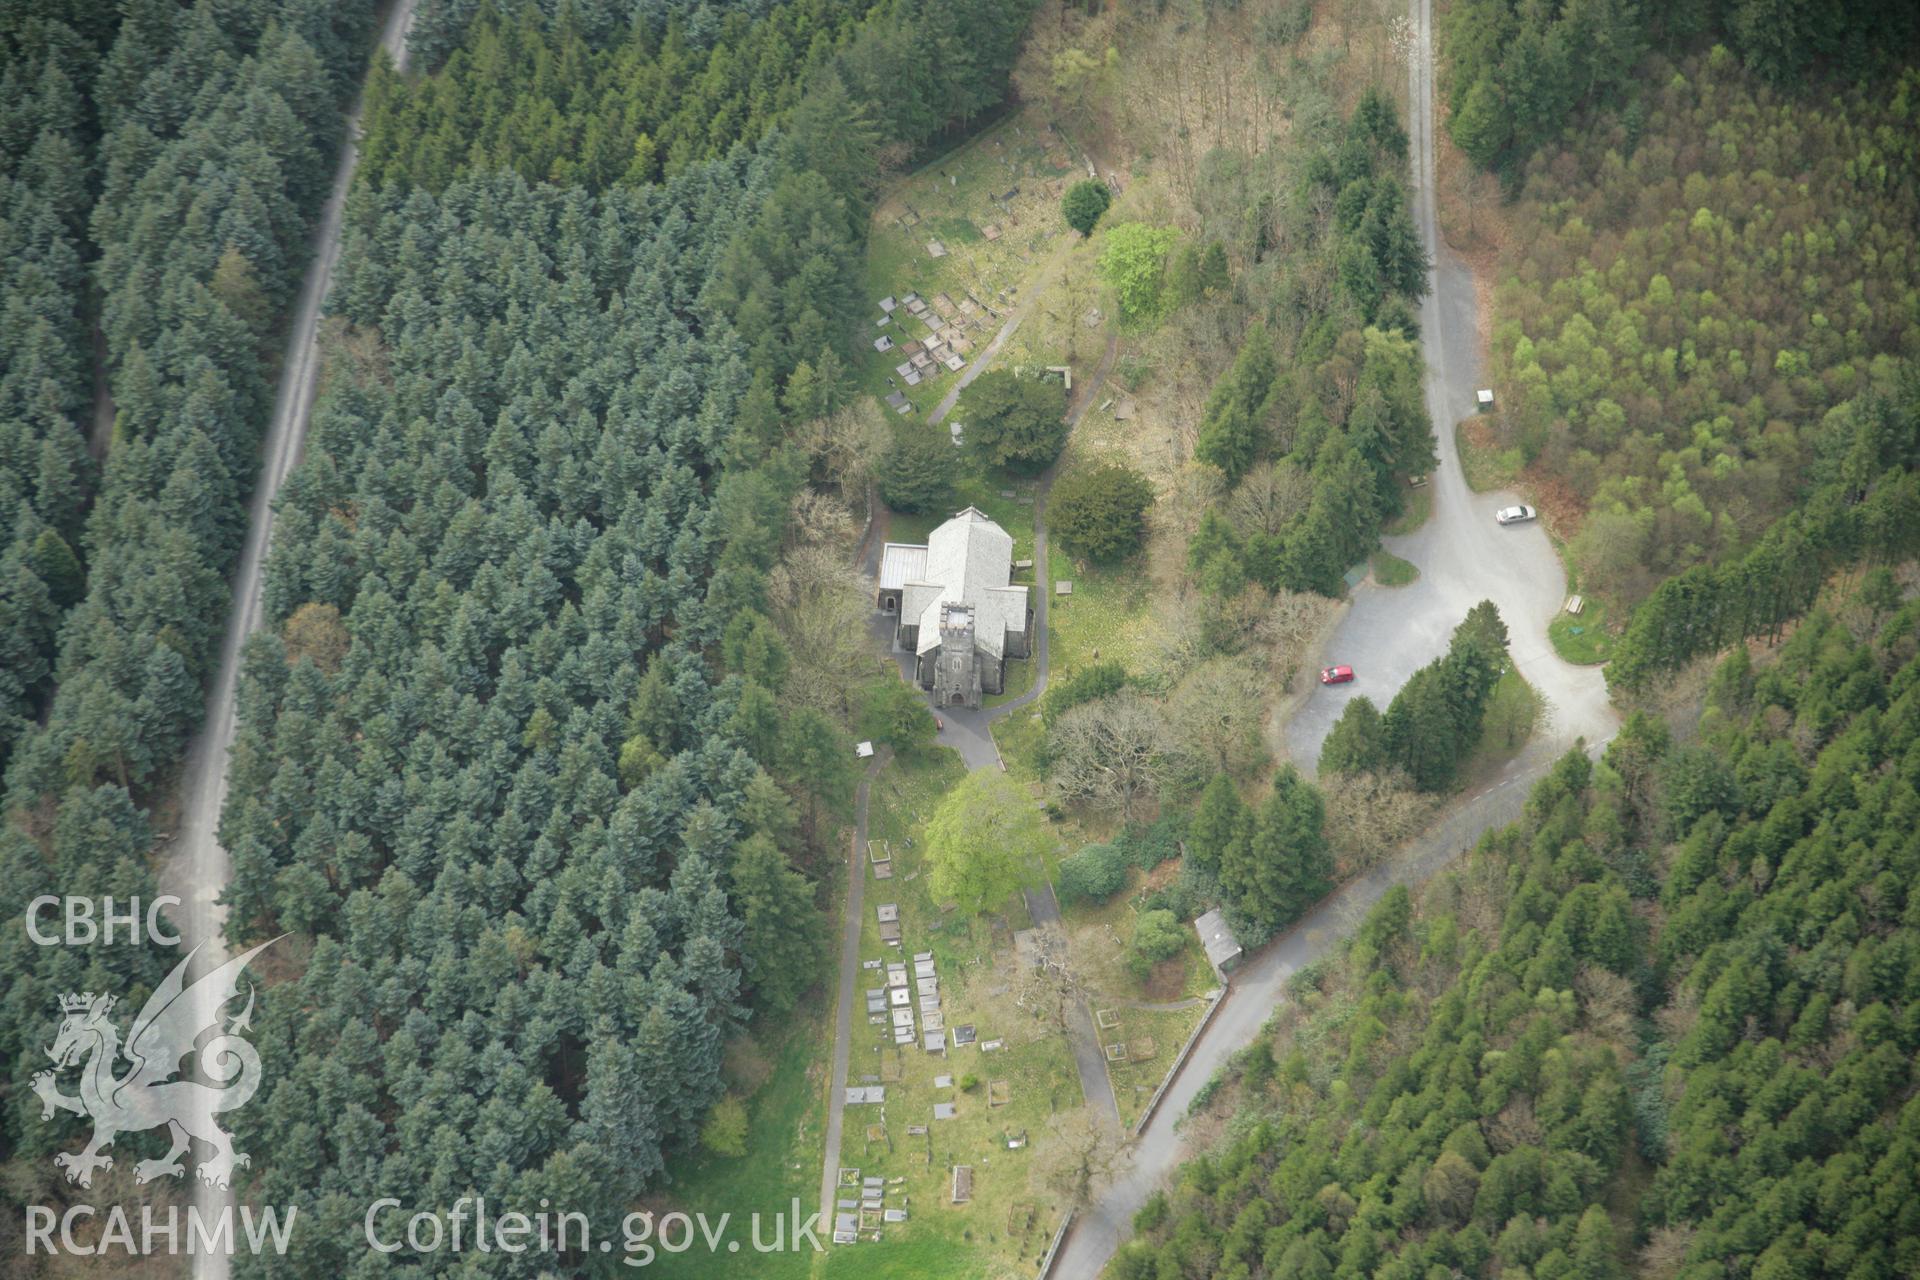 RCAHMW colour oblique aerial photograph of Hafod Uchtryd Church. Taken on 17 April 2007 by Toby Driver